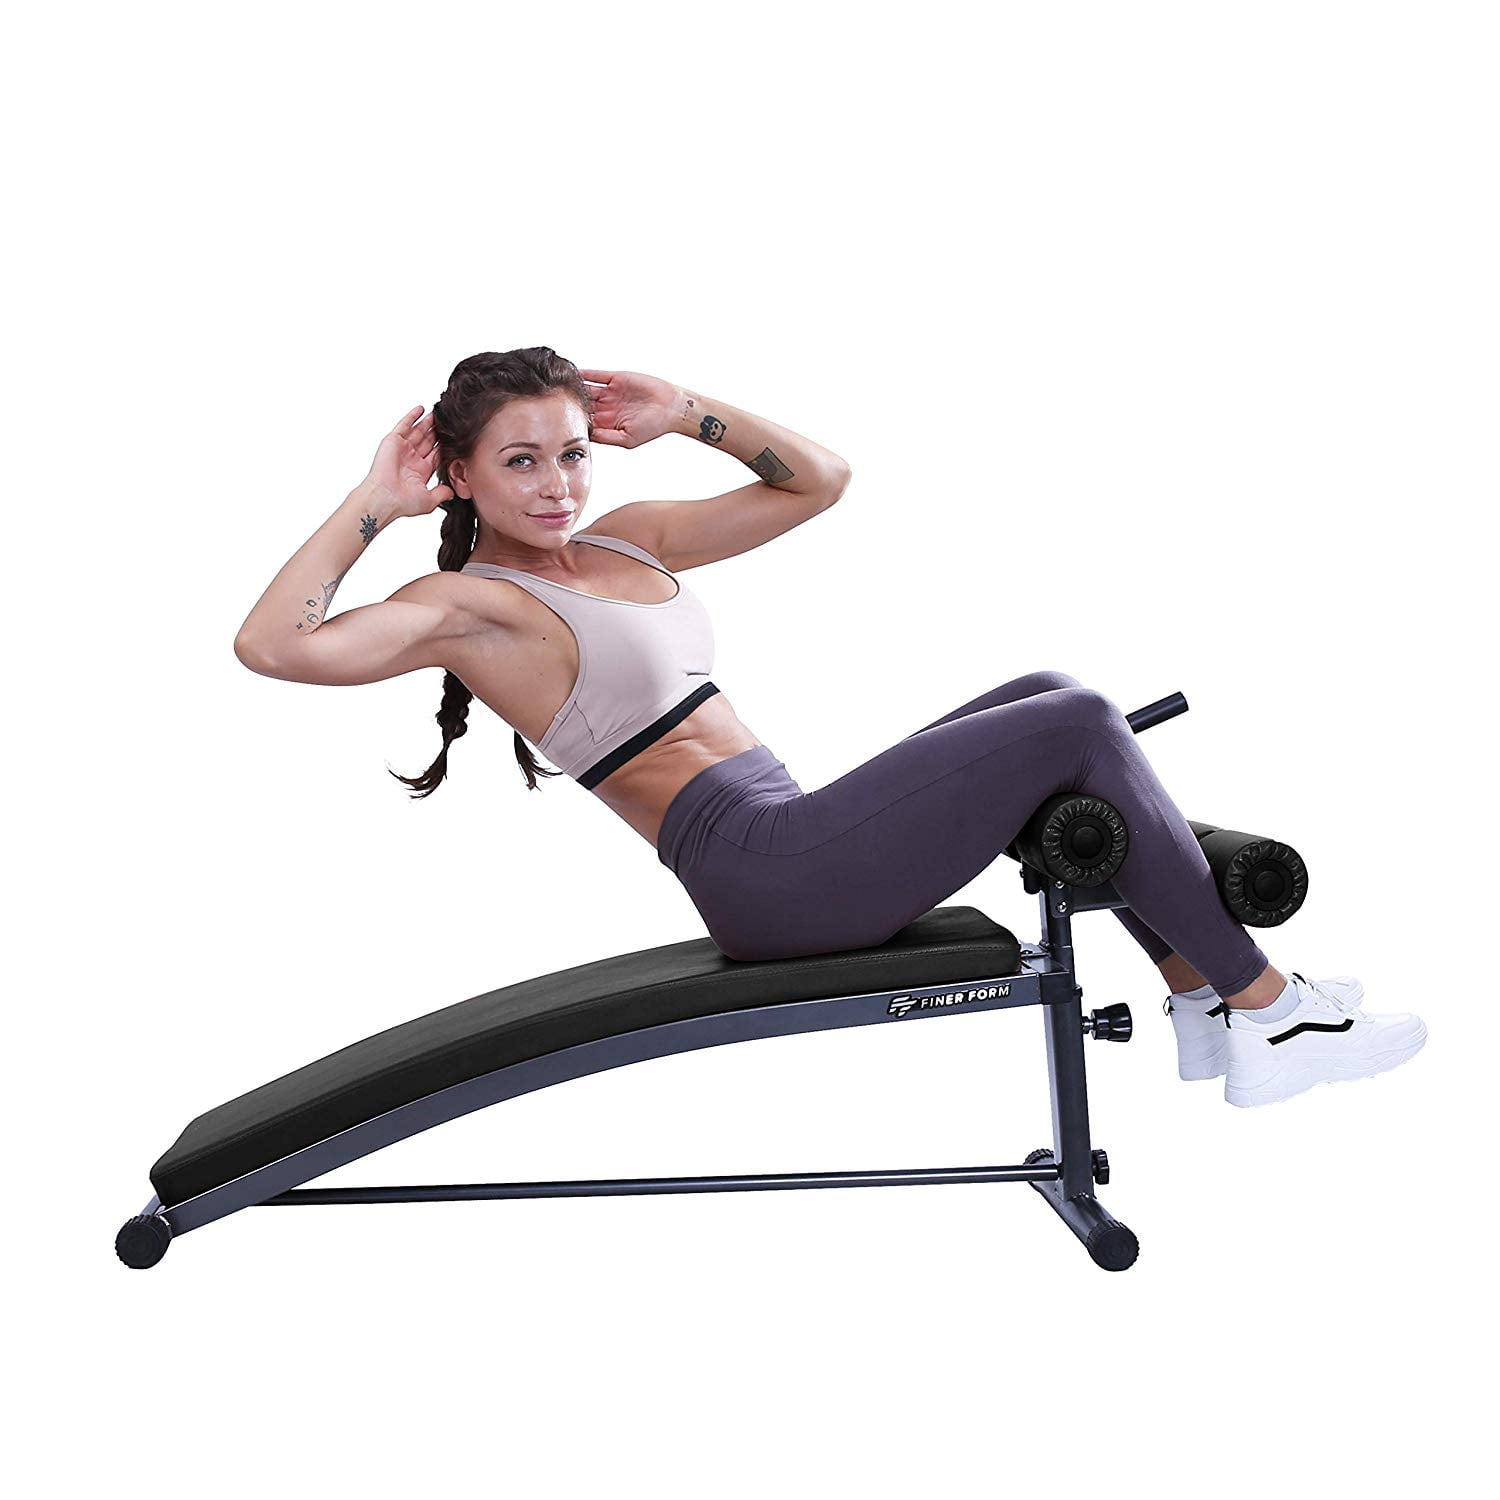 Flat Incline Decline Multi Use Not Othe Free Weights Ycrdtap Folding 90° Sit Ups Adjustable Incline Folding Bench Weight Bench with Leg Extension And Leg Curl for Home Gym Ab Exercise